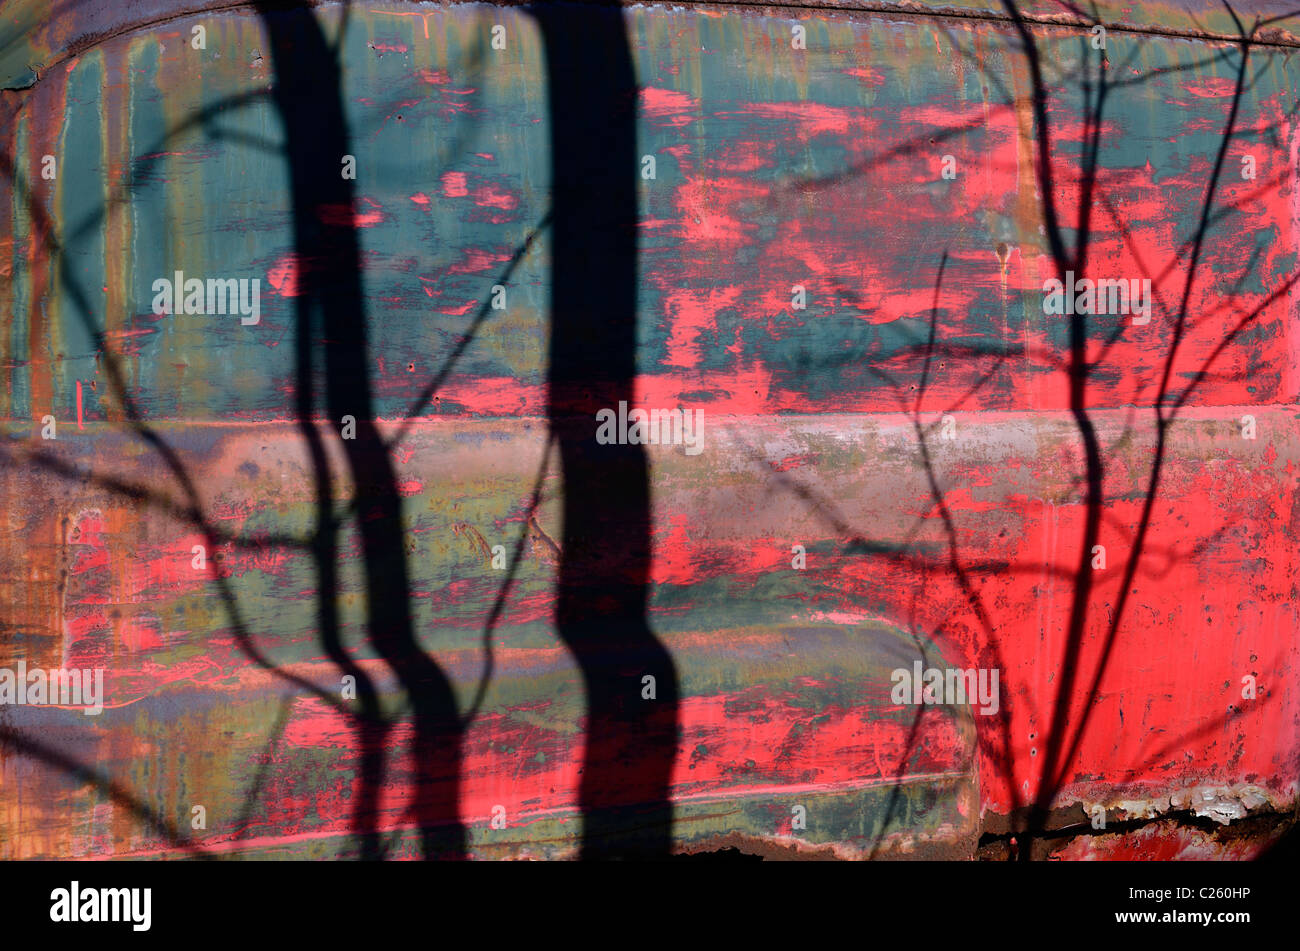 Colorful side of abandoned truck in forest looking like red sunset on a blue lake through the trees Stock Photo